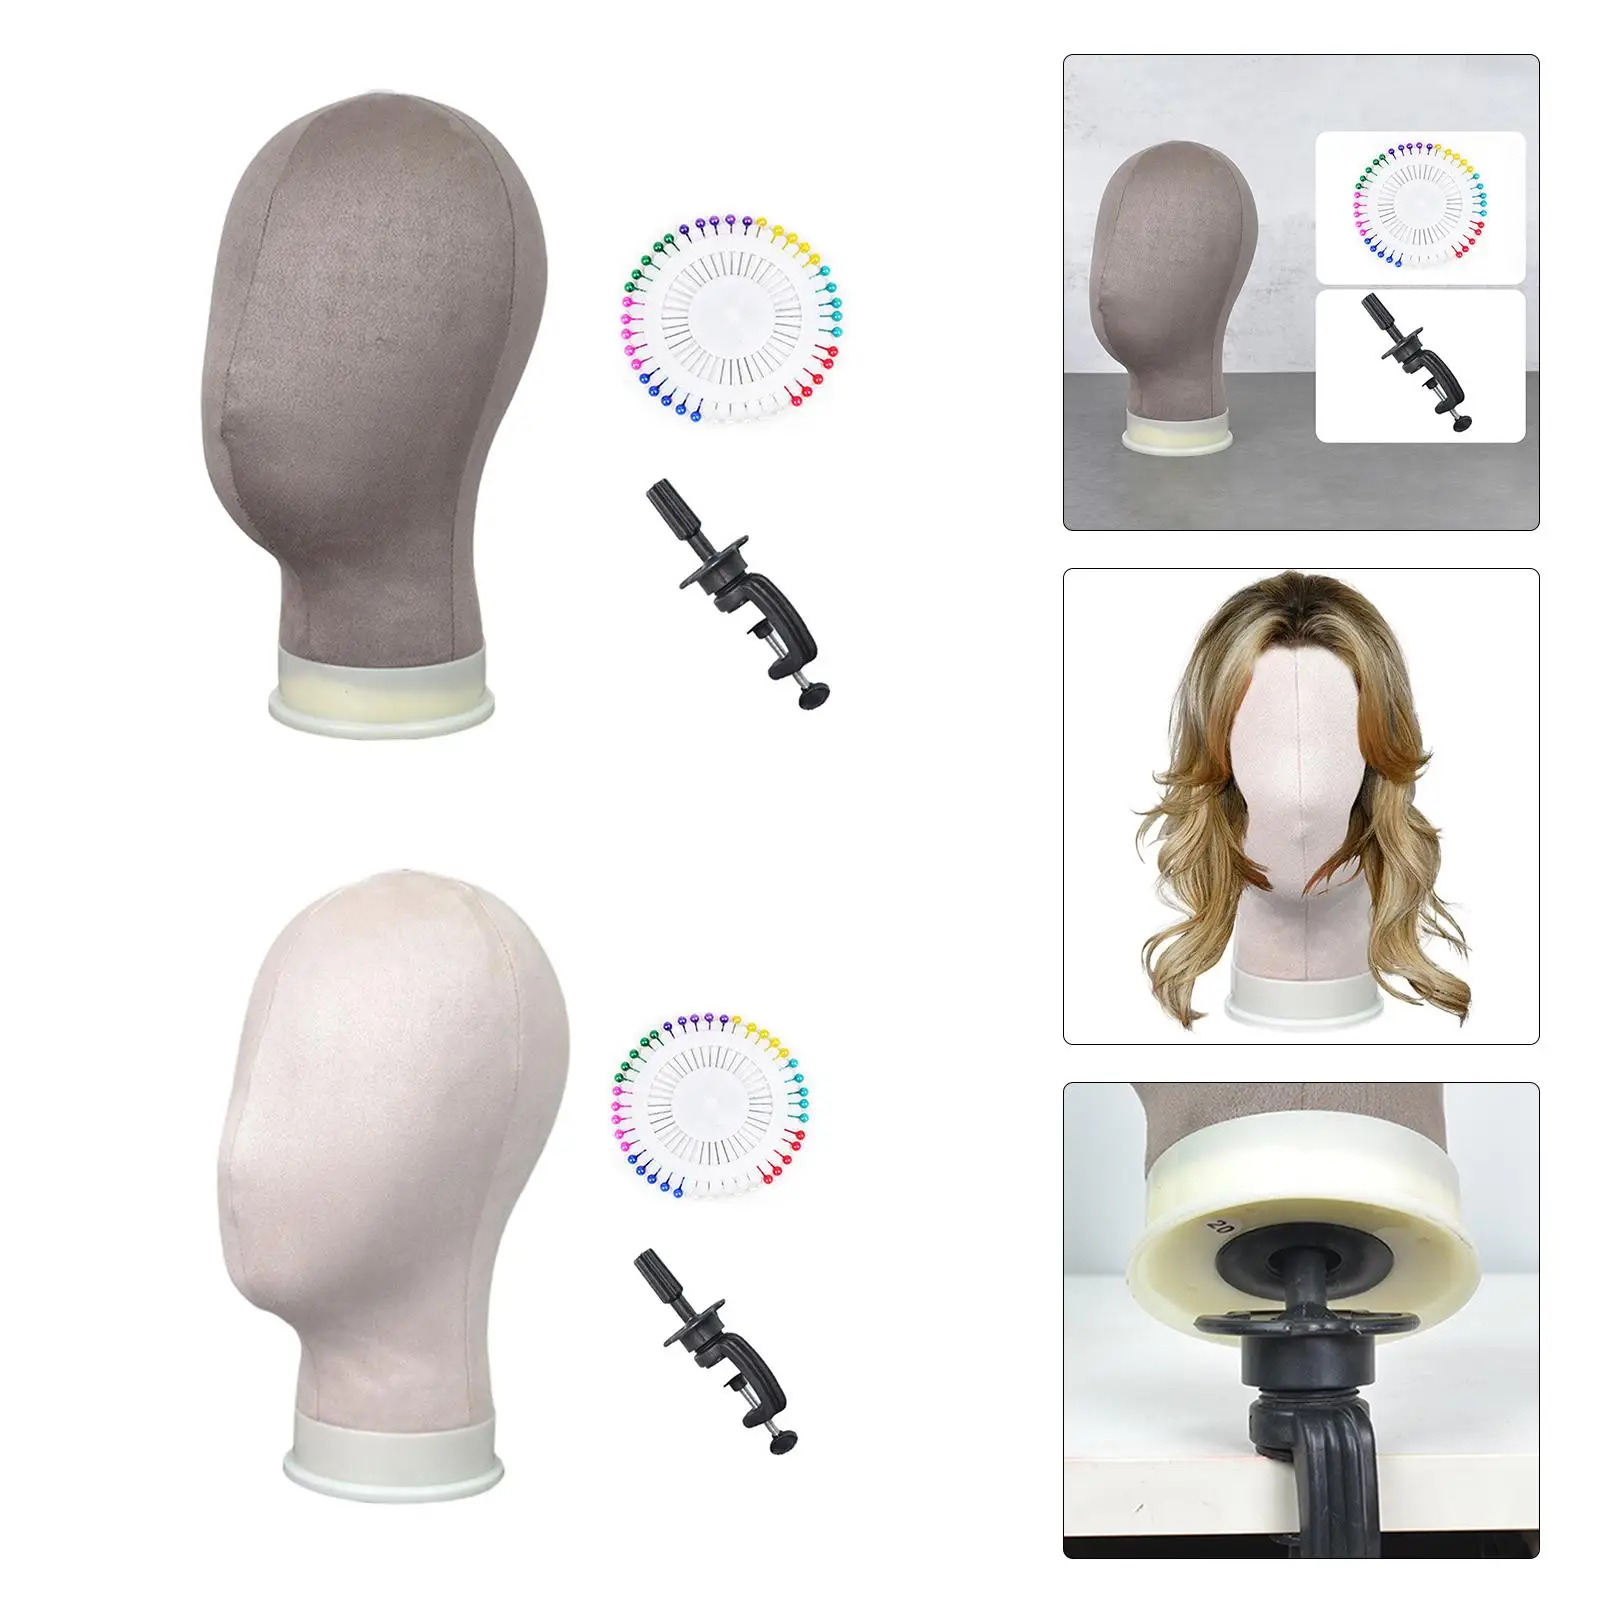 Wig Head Display with Pins Model Mannequin Head for Drying Making Wig Styling Hats